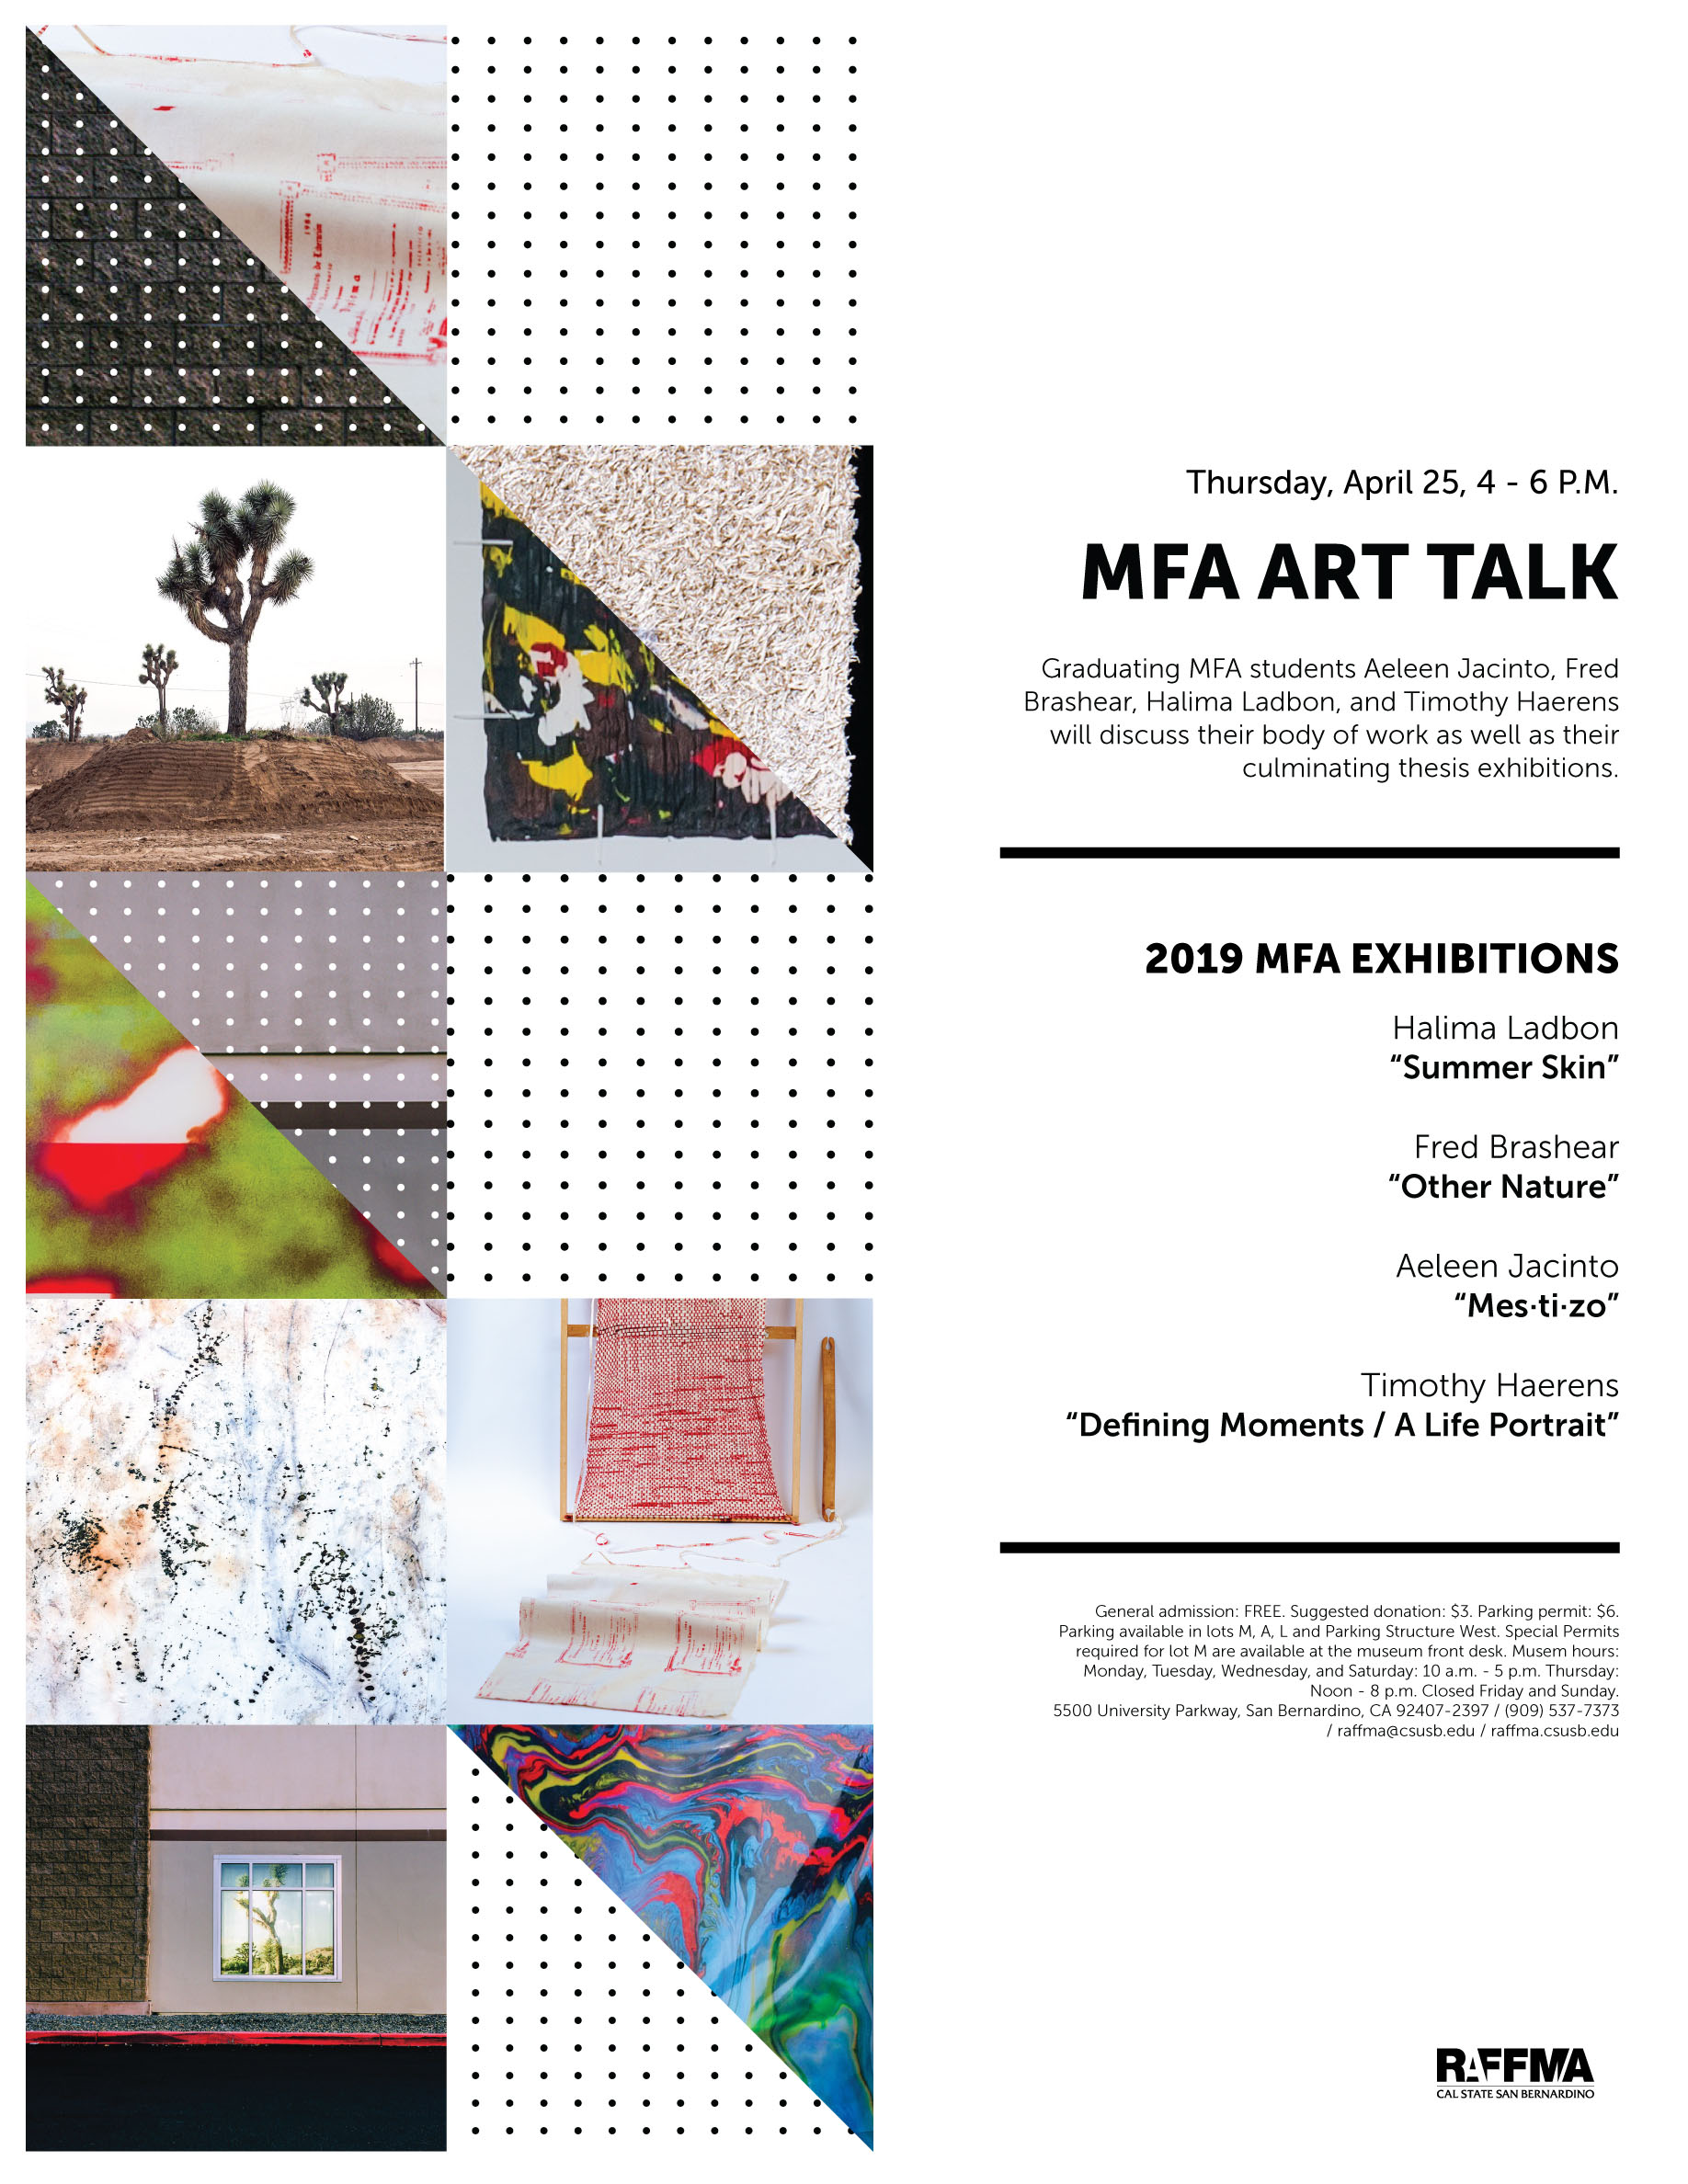 MFA Art Talk, featuring four students, coming to CSUSB art museum